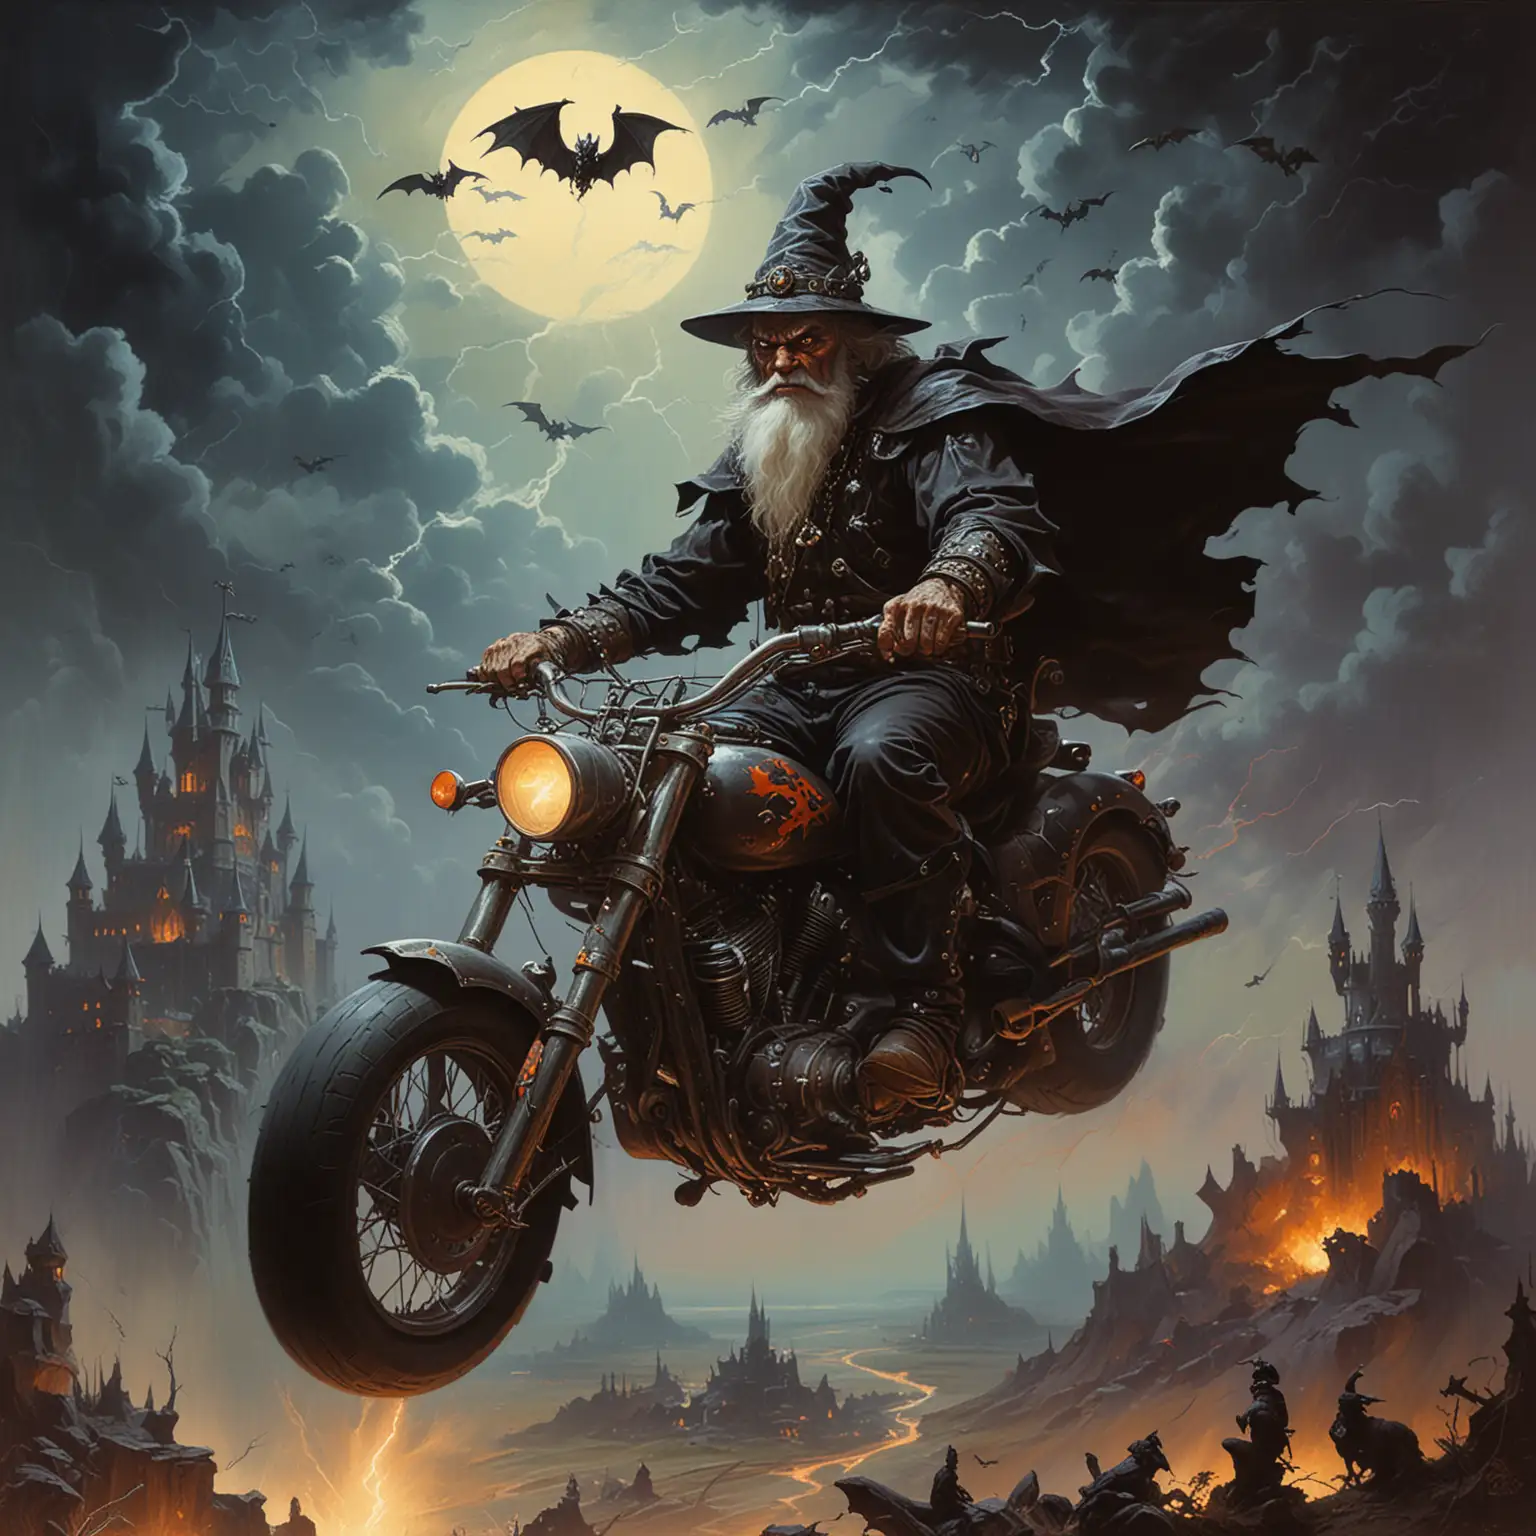 Sinister Wizard on Chopper Motorcycle with Castle Backdrop Retro Oil Painting